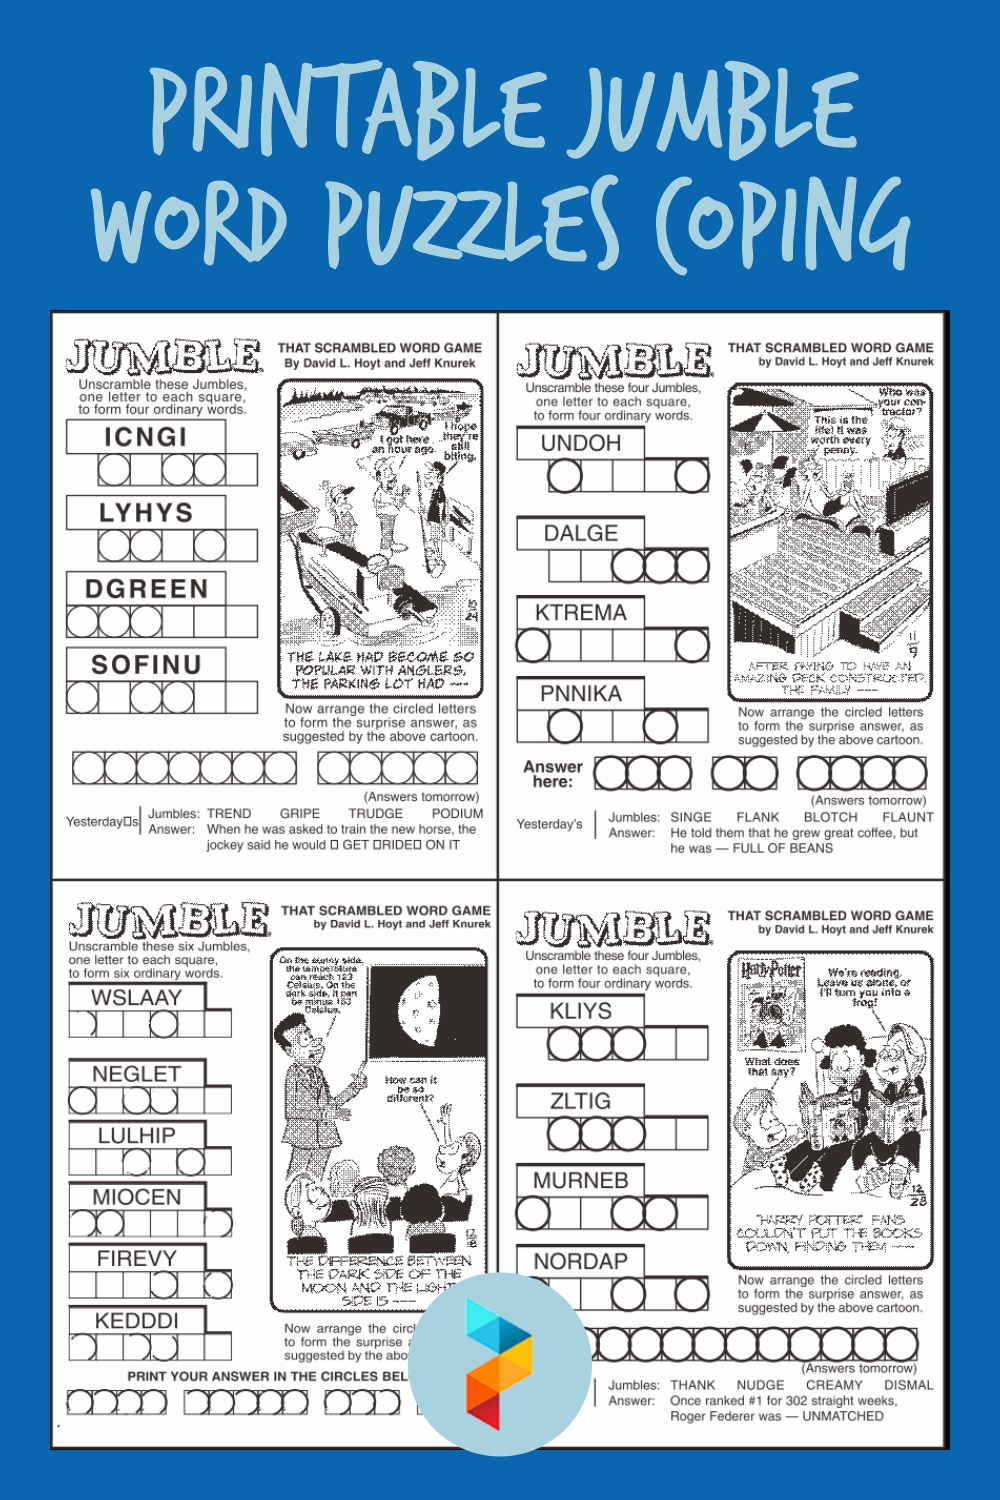 Printable Jumble Word Puzzles Coping